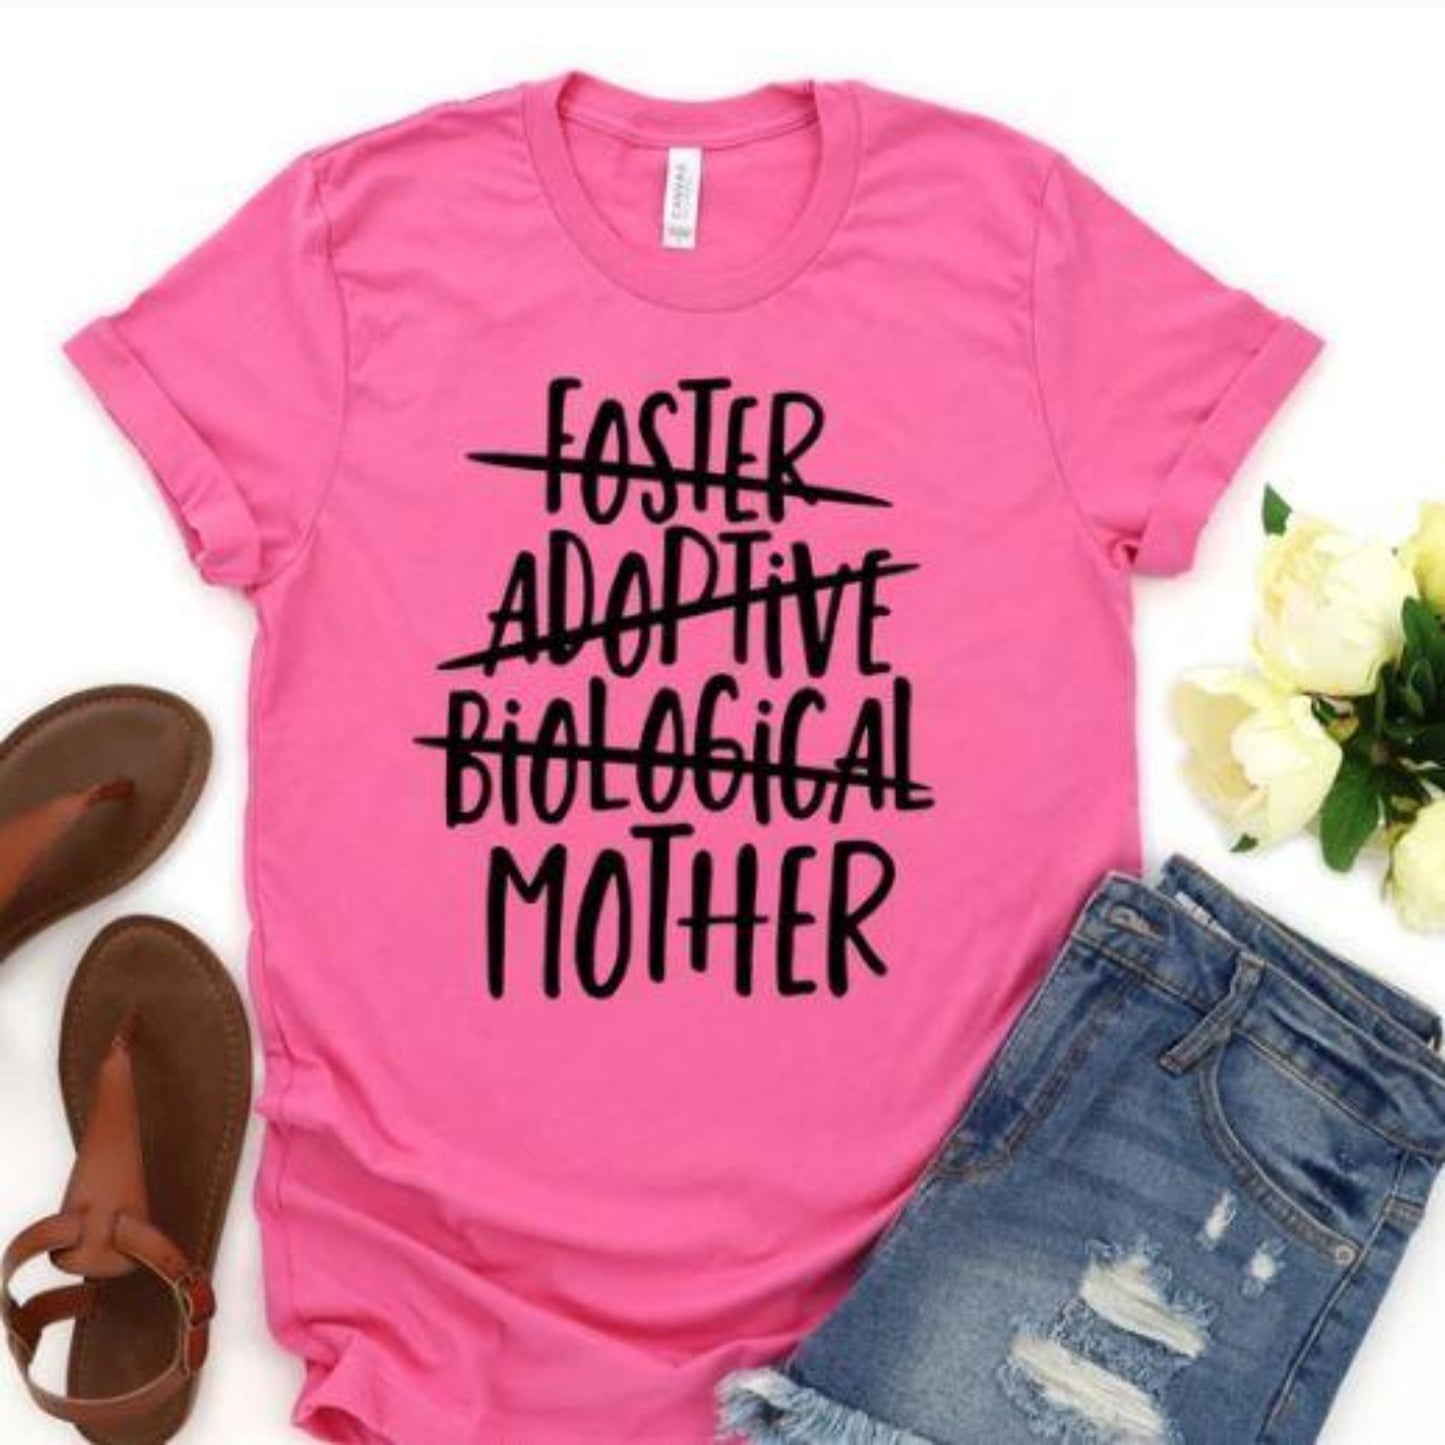 mother_specialty tee everyday wear casual shirt comfortable tshirt